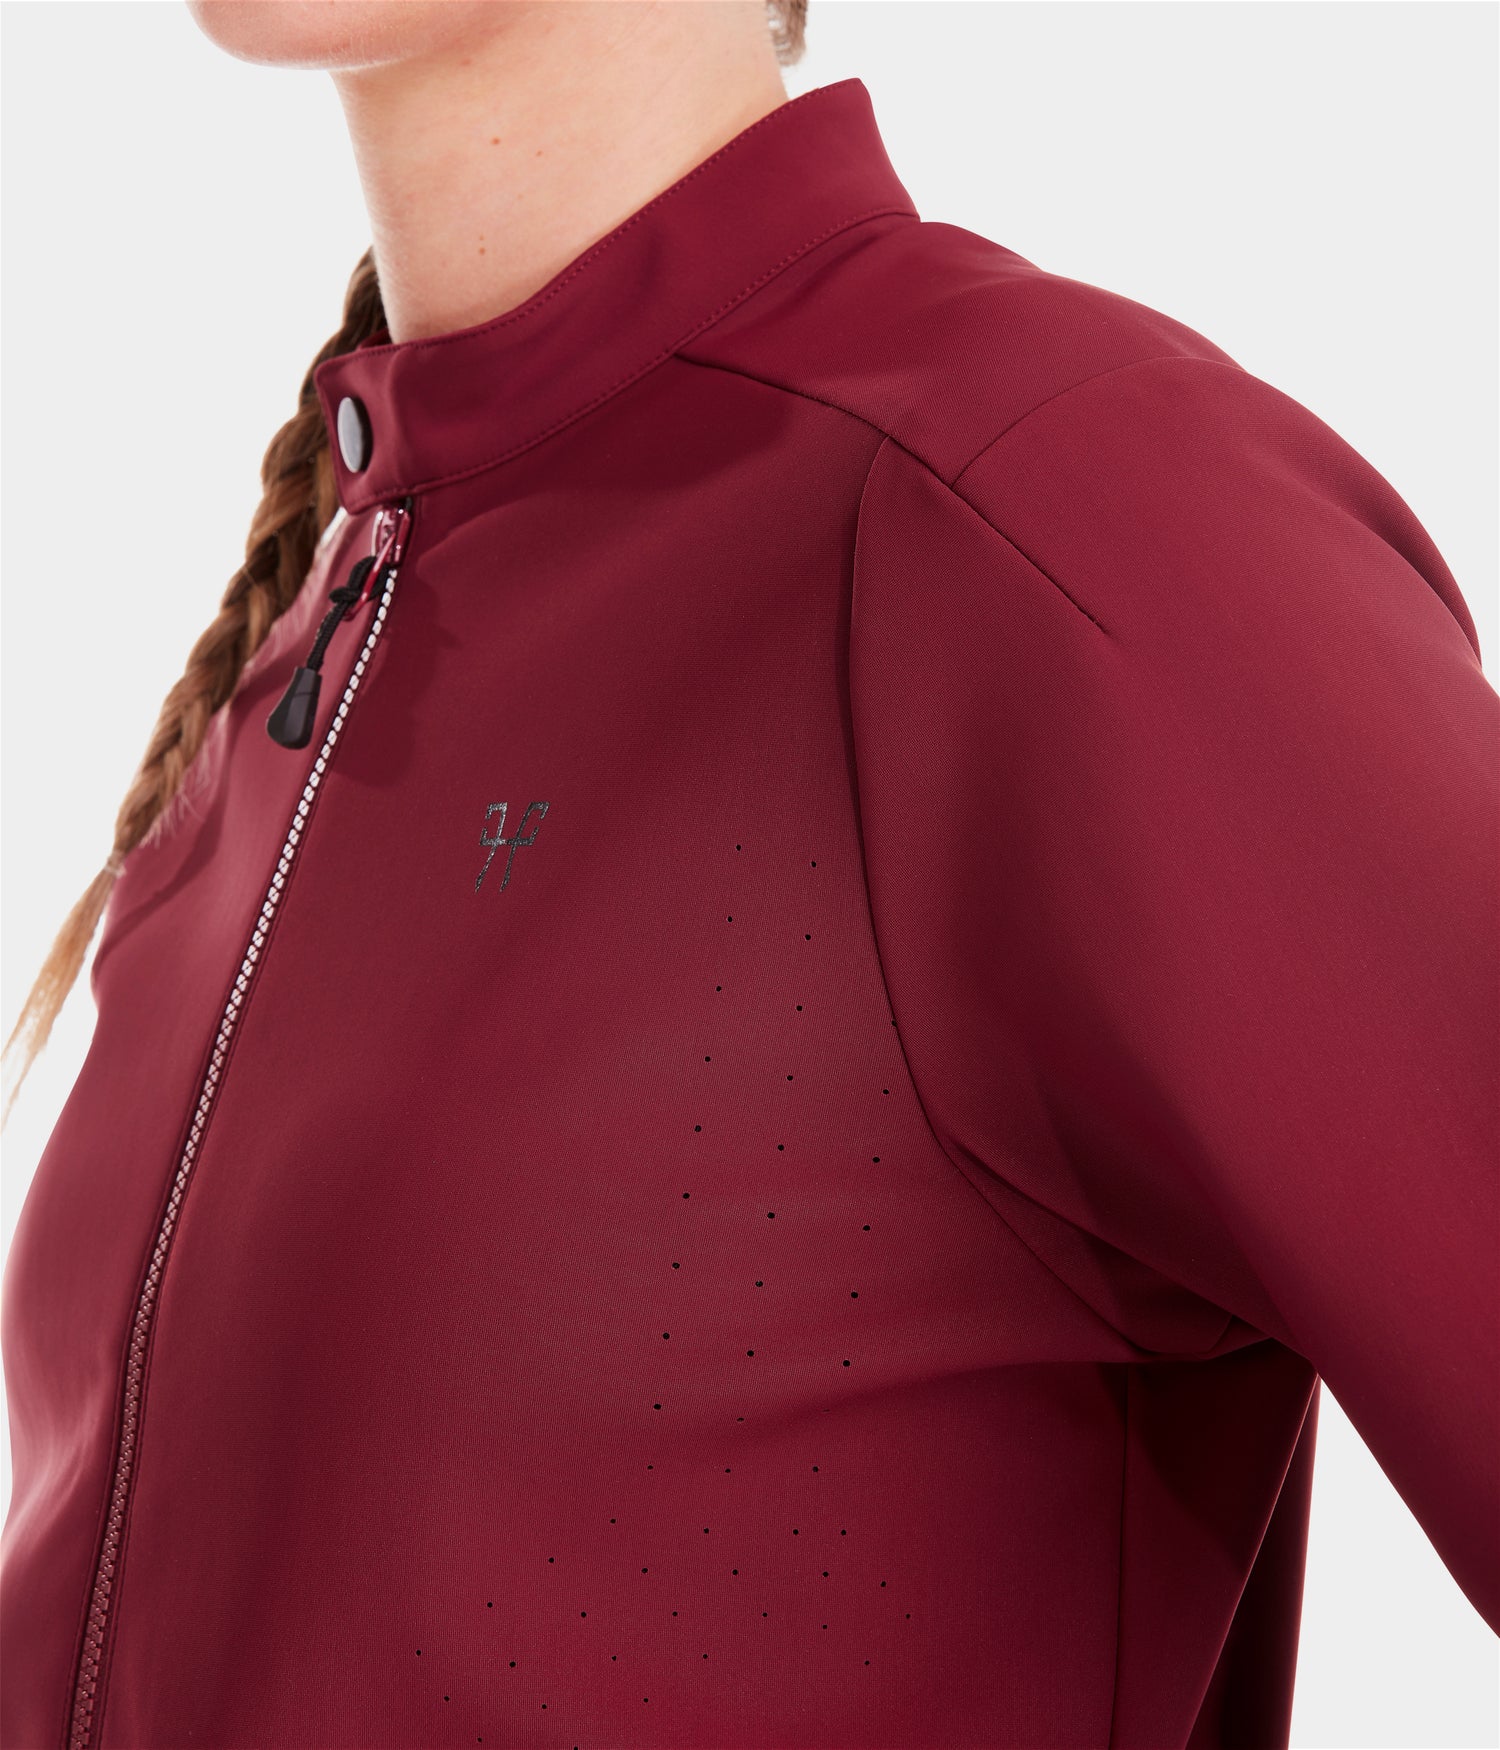 equestrian airbag compatible jacket